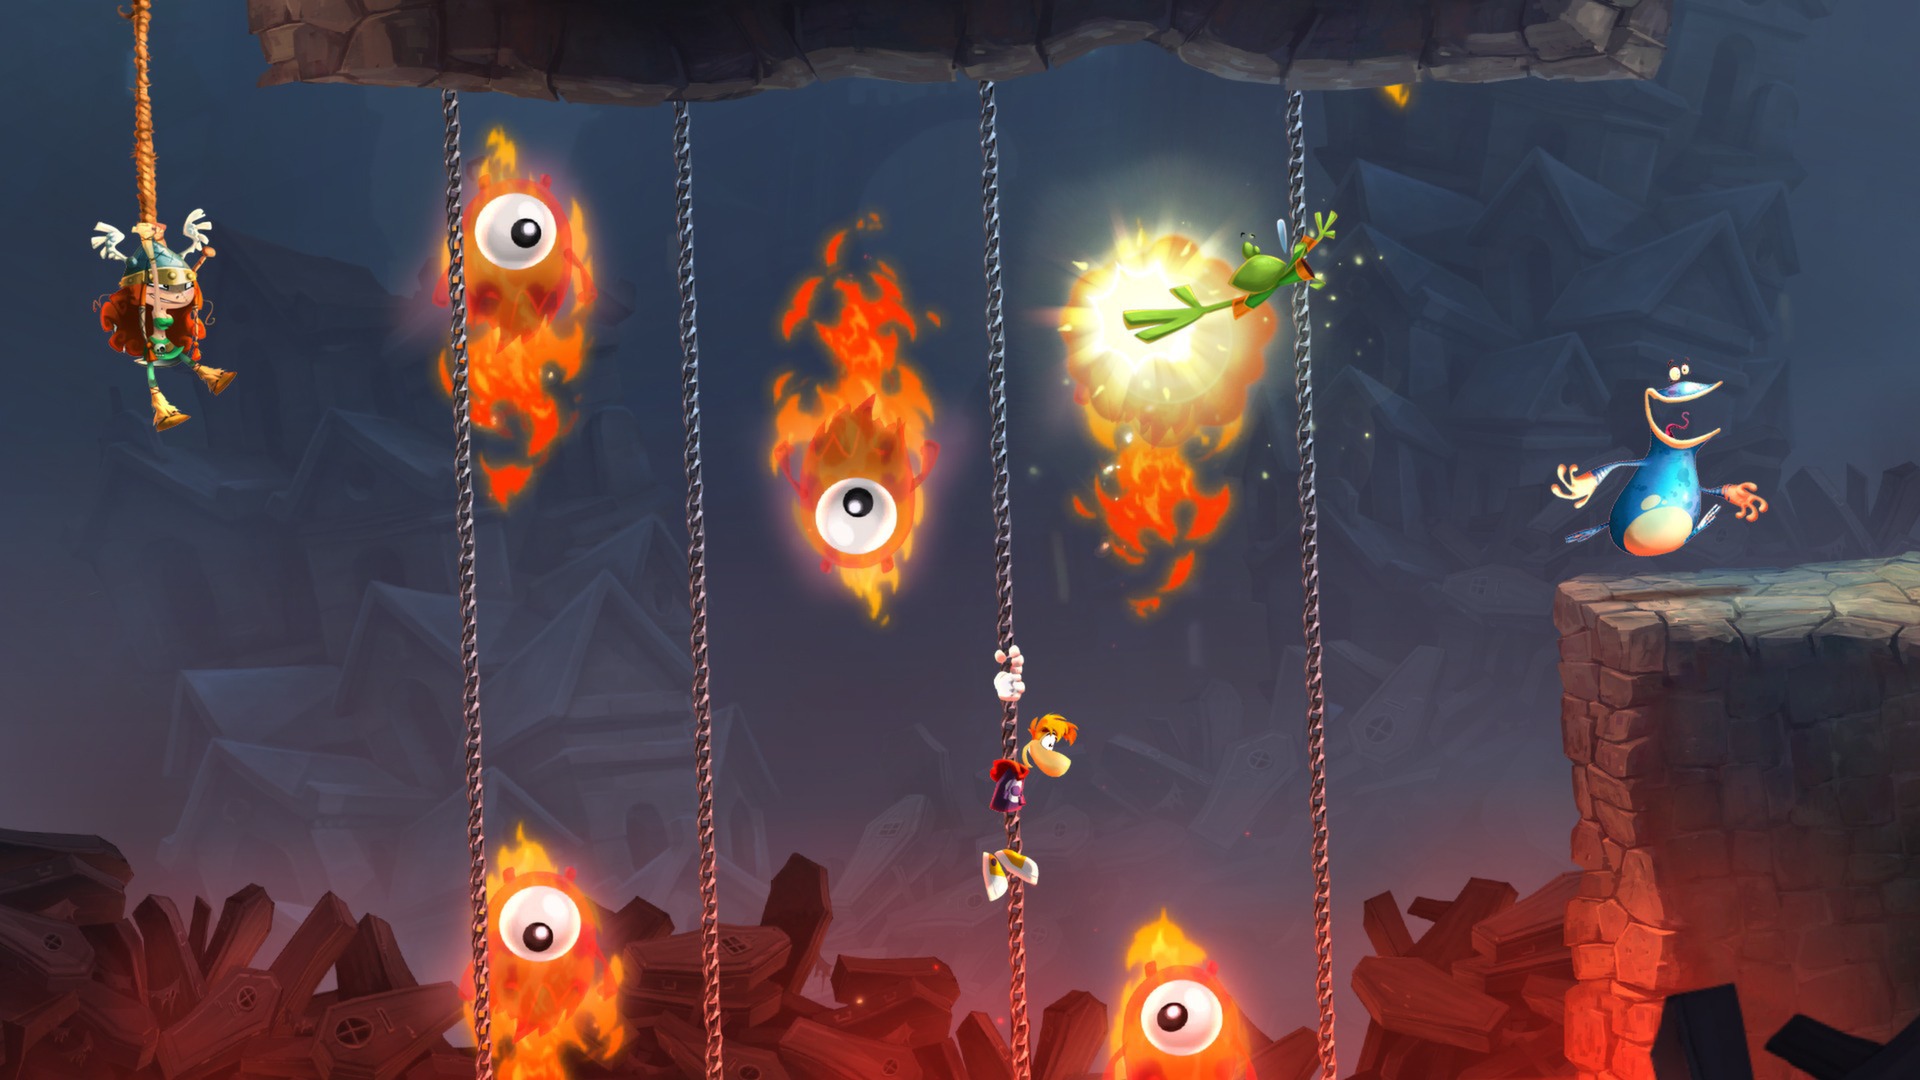 Rayman Legends Free for A Limited Time